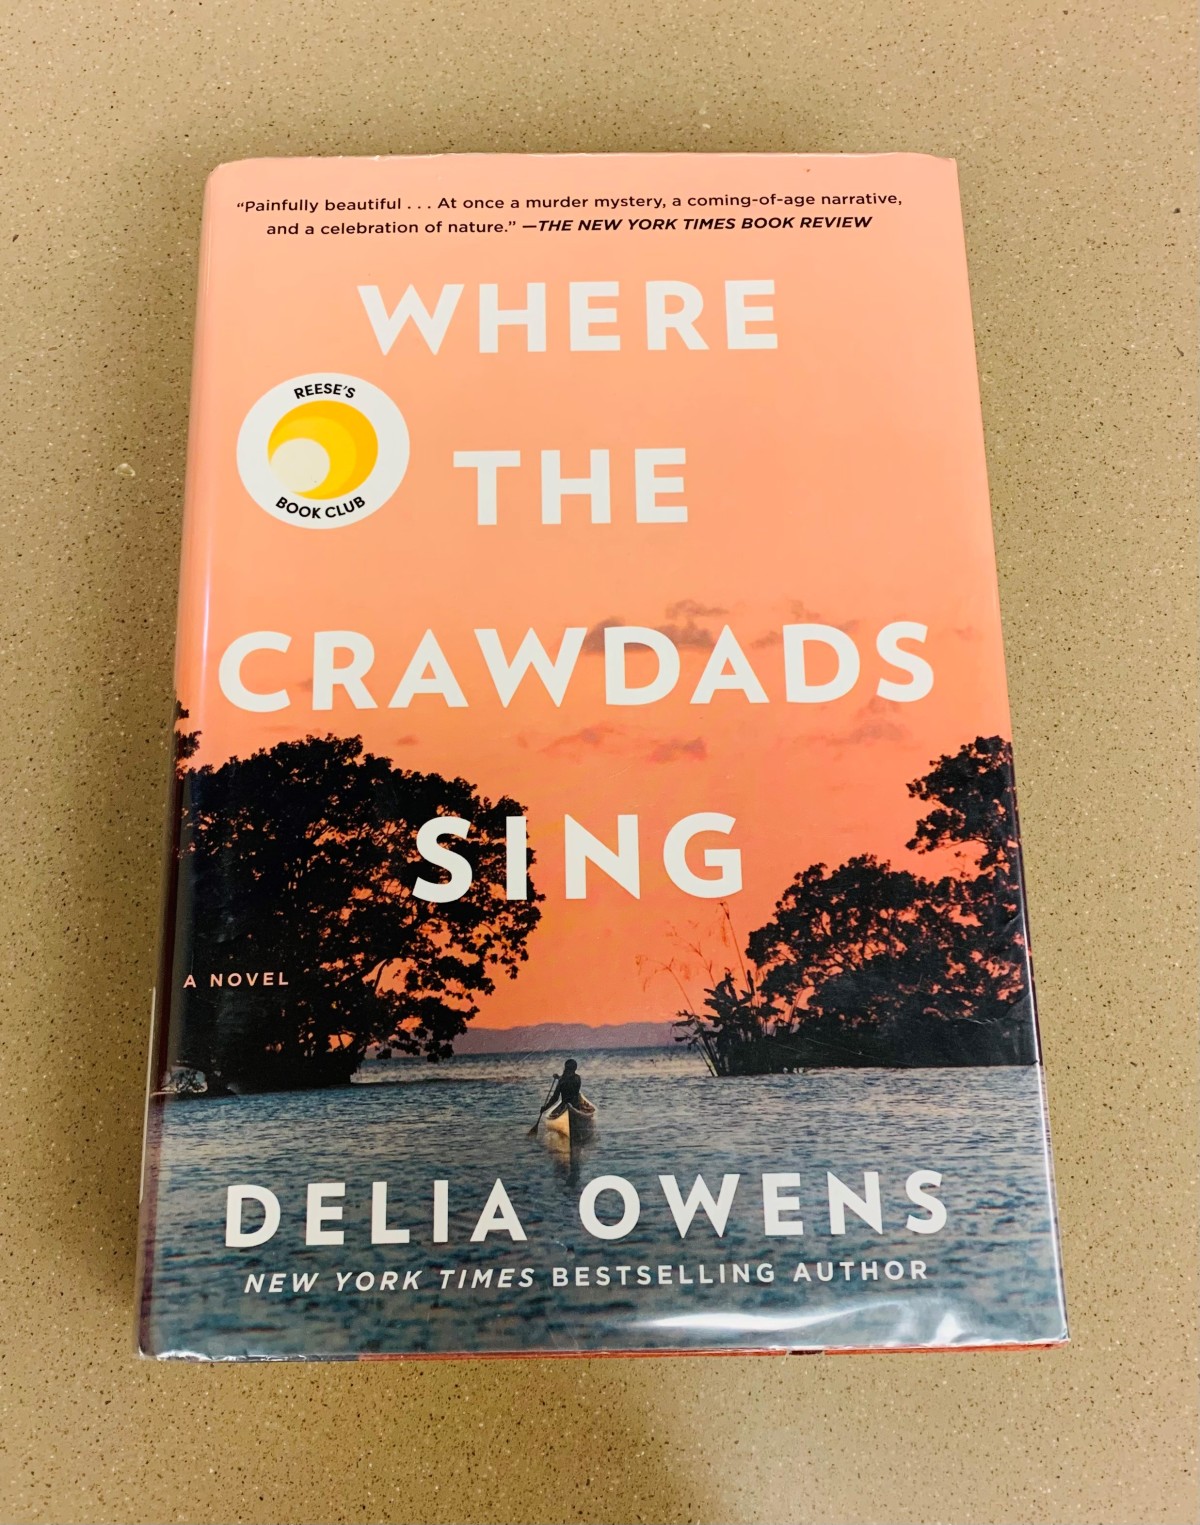 Library Staff Book Club: Where the Crawdads Sing by Delia Owens